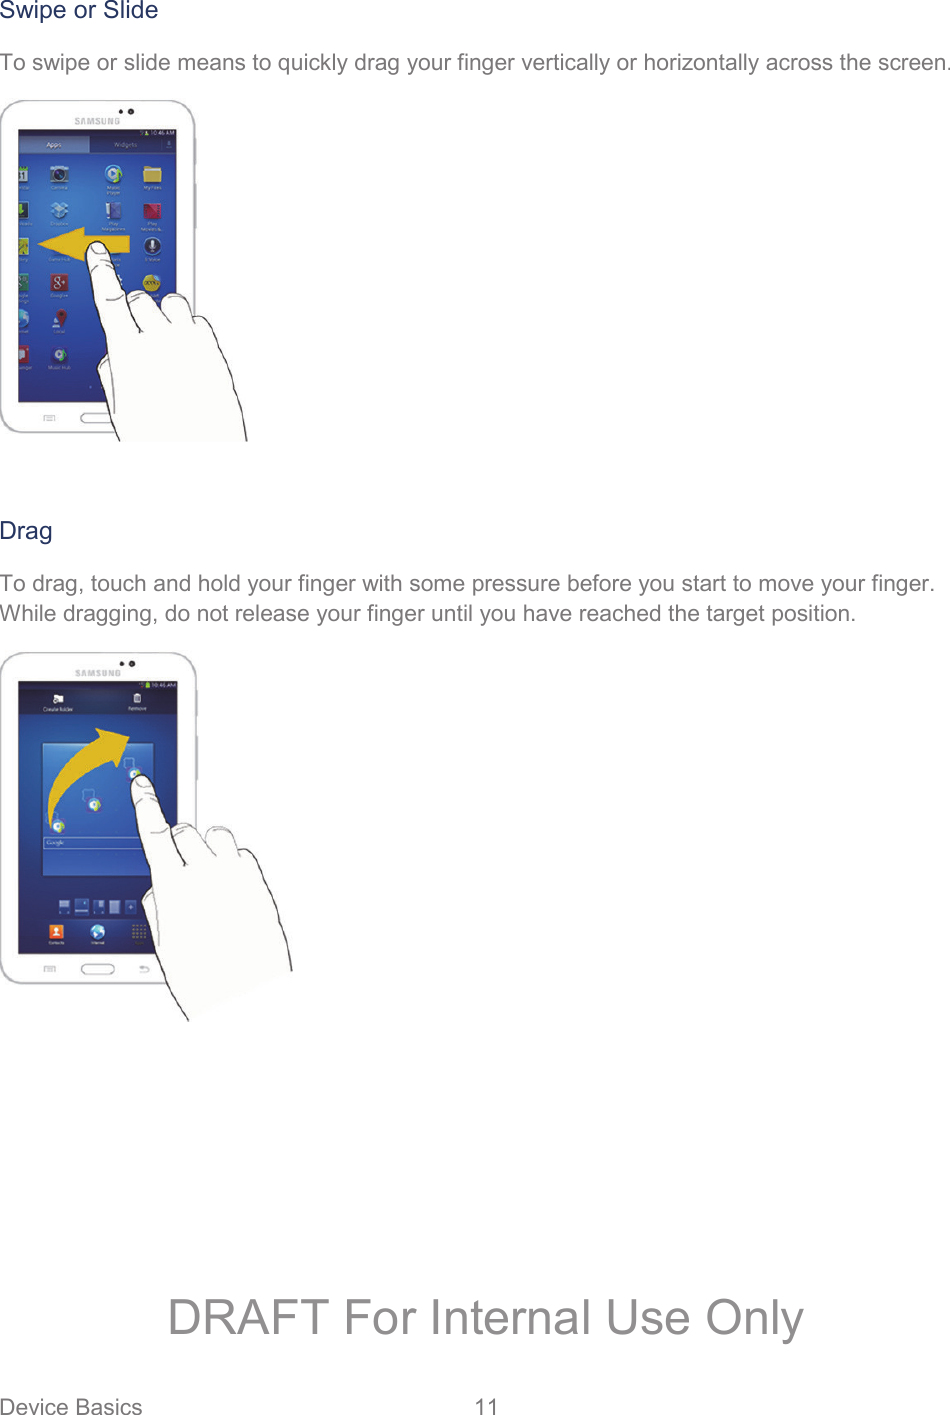 Device Basics  11   Swipe or Slide To swipe or slide means to quickly drag your finger vertically or horizontally across the screen.   Drag To drag, touch and hold your finger with some pressure before you start to move your finger. While dragging, do not release your finger until you have reached the target position.   DRAFT For Internal Use Only